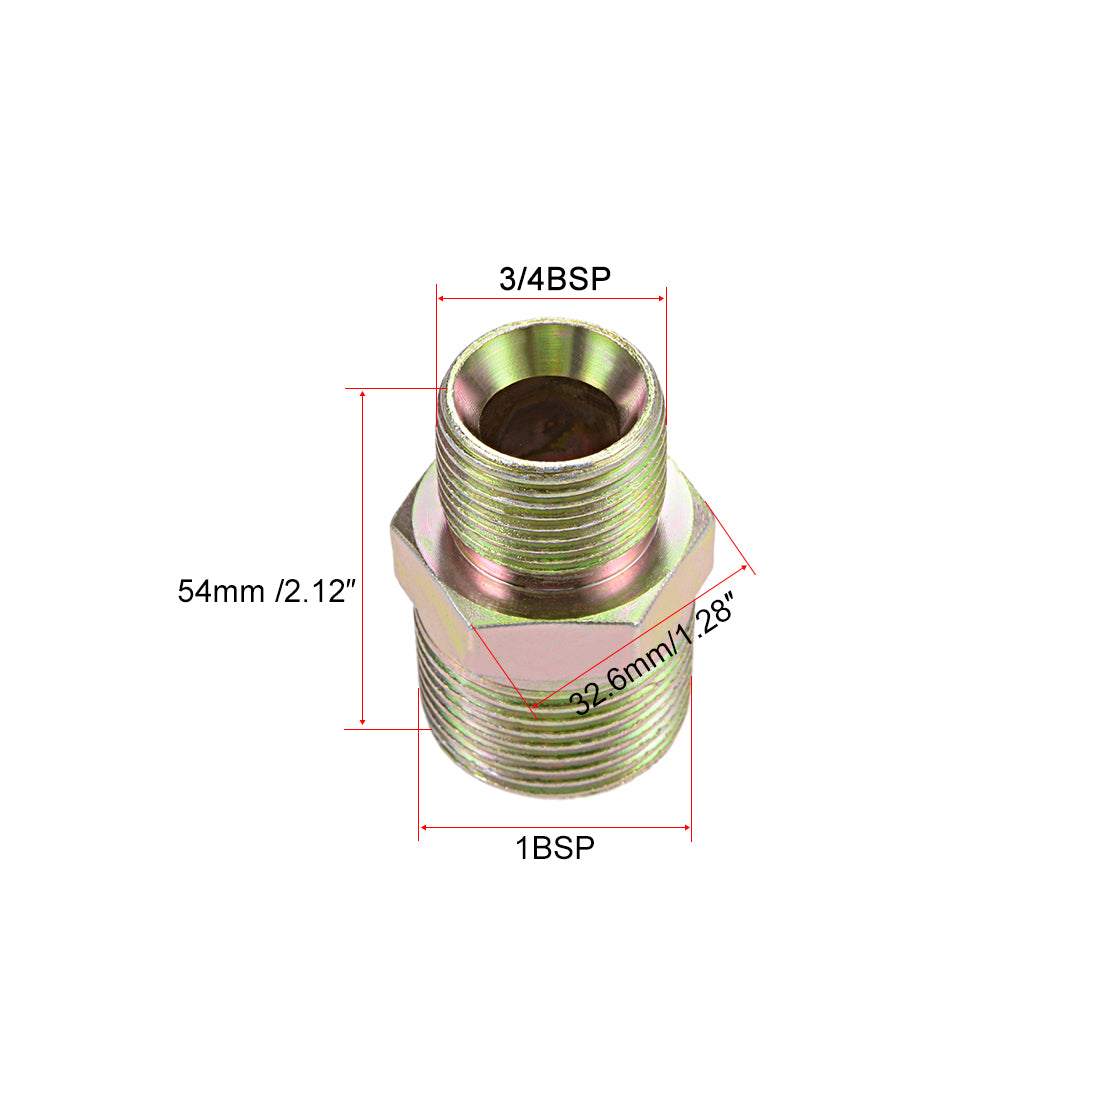 Uxcell Uxcell Reducing Pipe Fitting - Reducer Hex Nipple - 1 X 3/4 BSP Male Connector Zinc Finish Plating 2Pcs